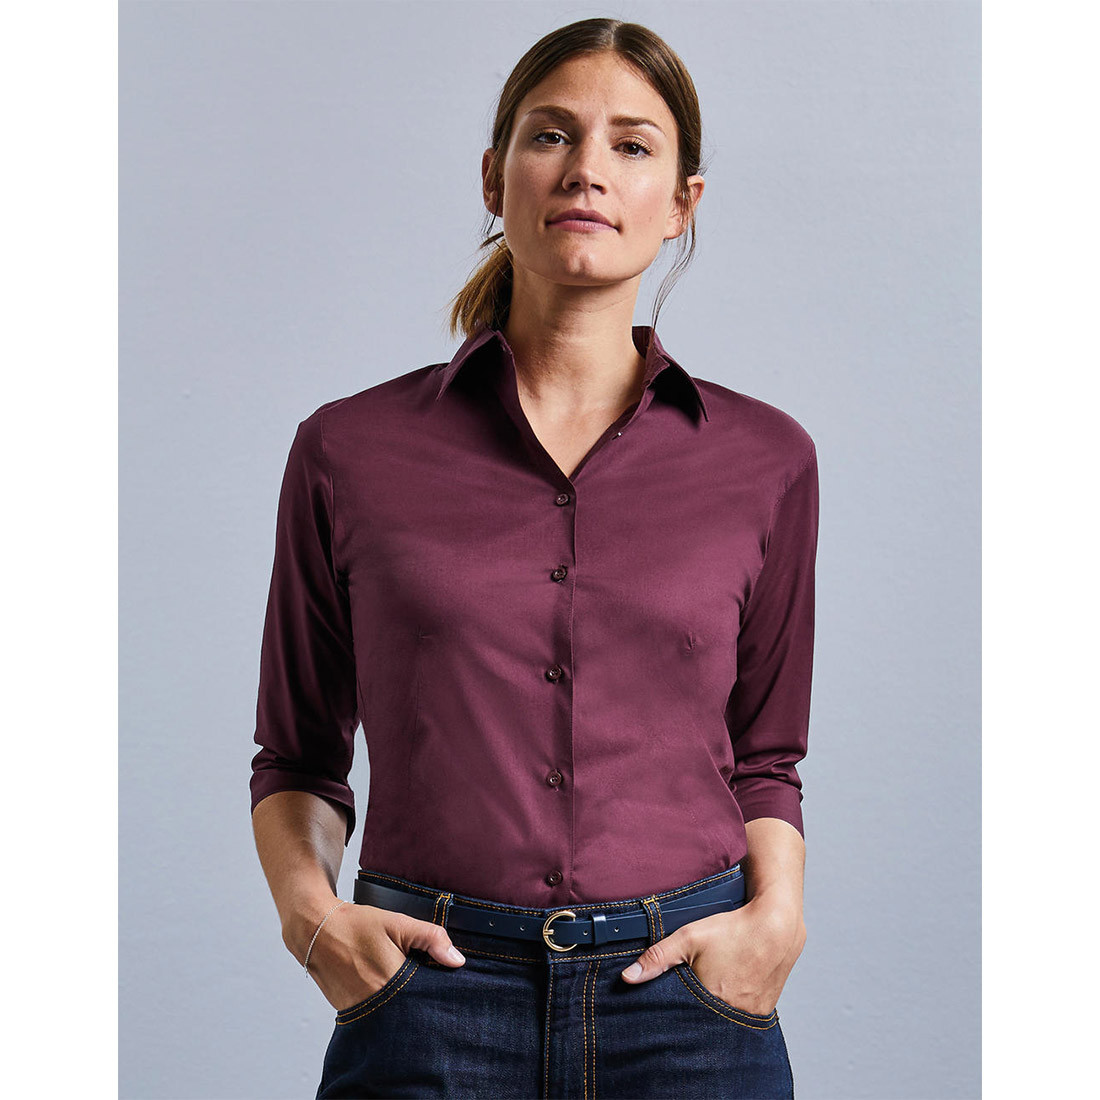 Fitted Blouse with 3/4 Sleeves - Les vêtements de protection